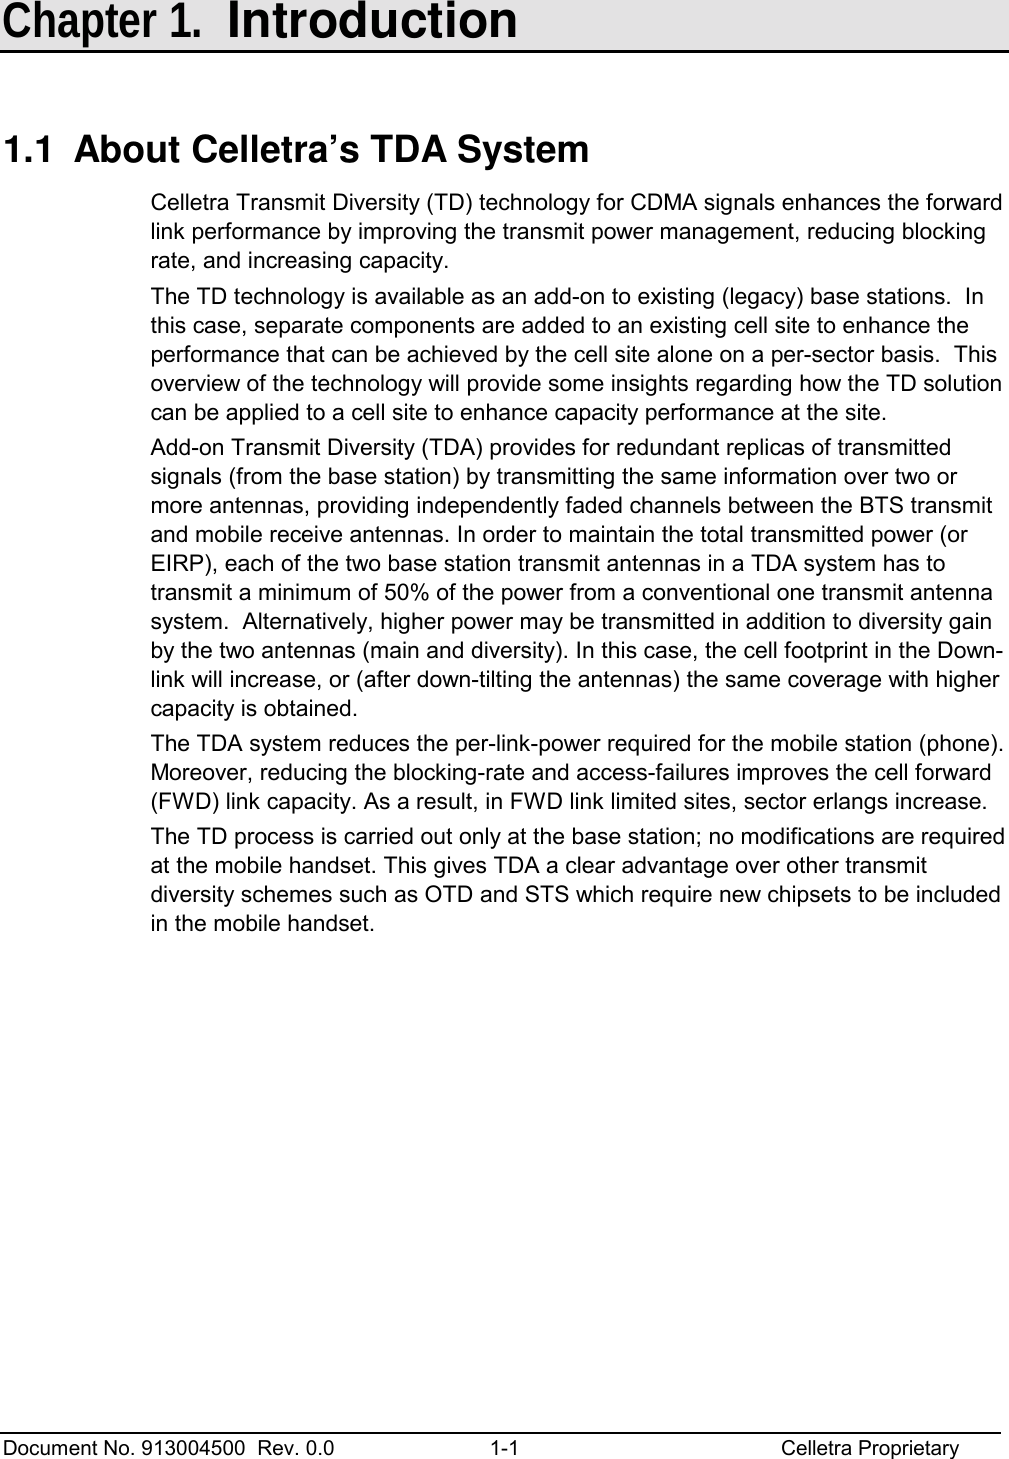  Document No. 913004500  Rev. 0.0  1-1  Celletra Proprietary  Chapter 1.  Introduction 1.1  About Celletra’s TDA System Celletra Transmit Diversity (TD) technology for CDMA signals enhances the forward link performance by improving the transmit power management, reducing blocking rate, and increasing capacity.  The TD technology is available as an add-on to existing (legacy) base stations.  In this case, separate components are added to an existing cell site to enhance the performance that can be achieved by the cell site alone on a per-sector basis.  This overview of the technology will provide some insights regarding how the TD solution can be applied to a cell site to enhance capacity performance at the site.   Add-on Transmit Diversity (TDA) provides for redundant replicas of transmitted signals (from the base station) by transmitting the same information over two or more antennas, providing independently faded channels between the BTS transmit and mobile receive antennas. In order to maintain the total transmitted power (or EIRP), each of the two base station transmit antennas in a TDA system has to transmit a minimum of 50% of the power from a conventional one transmit antenna system.  Alternatively, higher power may be transmitted in addition to diversity gain by the two antennas (main and diversity). In this case, the cell footprint in the Down-link will increase, or (after down-tilting the antennas) the same coverage with higher capacity is obtained. The TDA system reduces the per-link-power required for the mobile station (phone). Moreover, reducing the blocking-rate and access-failures improves the cell forward (FWD) link capacity. As a result, in FWD link limited sites, sector erlangs increase.  The TD process is carried out only at the base station; no modifications are required at the mobile handset. This gives TDA a clear advantage over other transmit diversity schemes such as OTD and STS which require new chipsets to be included in the mobile handset. 